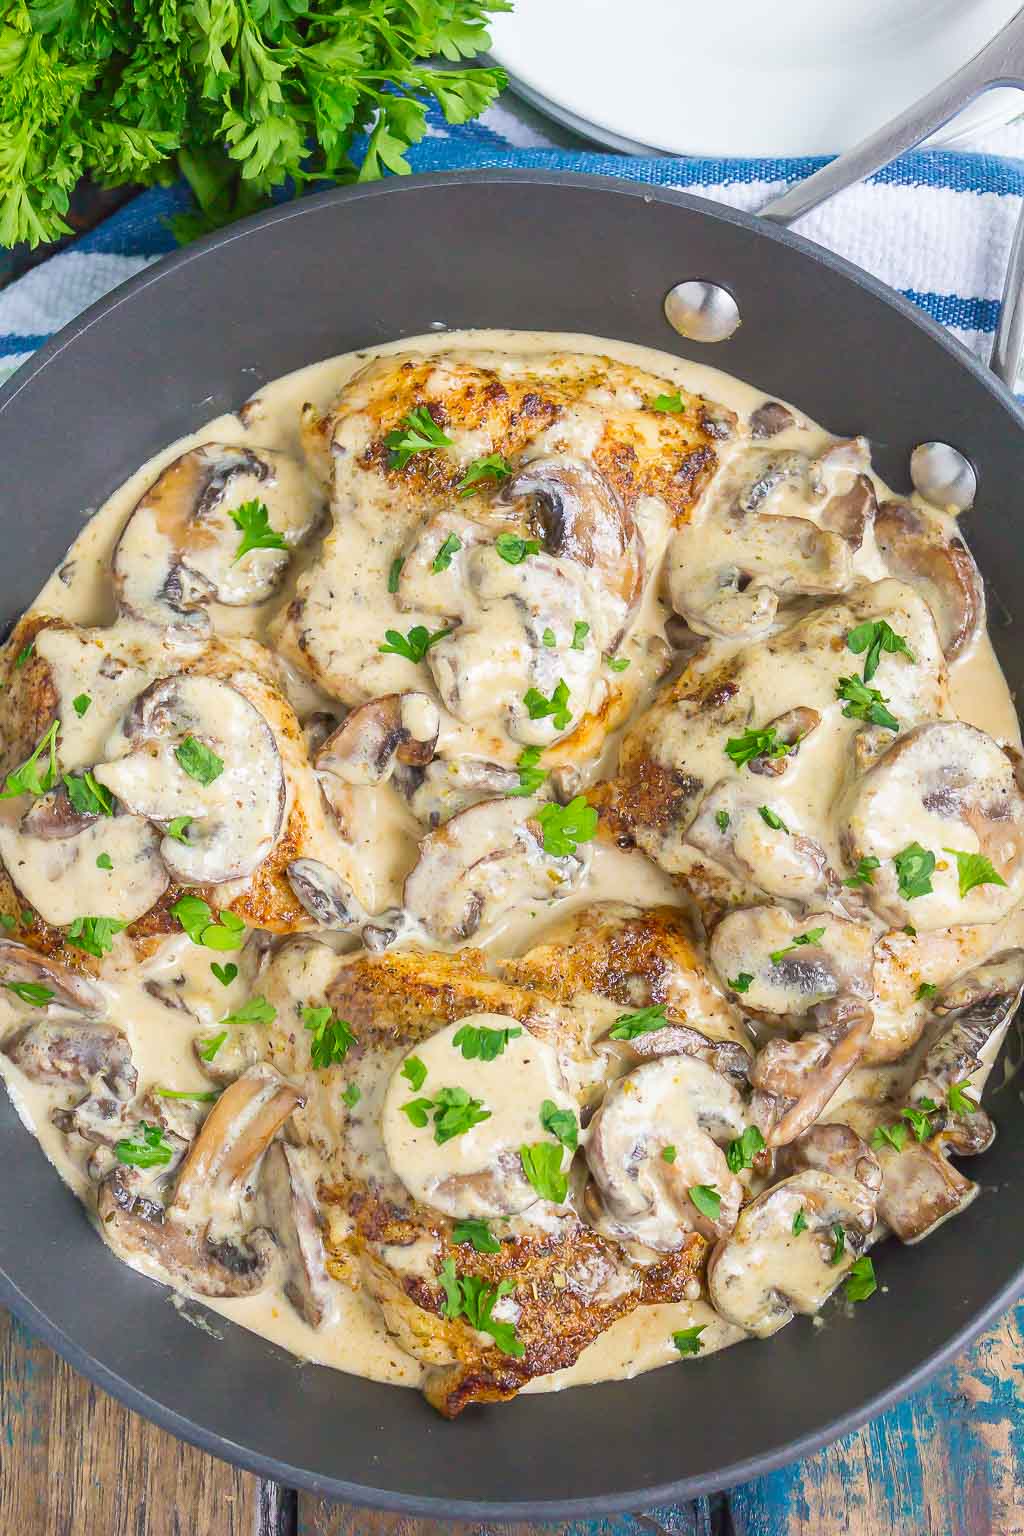 Creamy Parmesan Mushroom Chicken is an easy, one pan dish that's ready in just 30 minutes. Tender chicken and sautéd mushrooms are tossed in a simple parmesan cream sauce. It's fast, flavorful, and guaranteed to be a dinnertime favorite! 